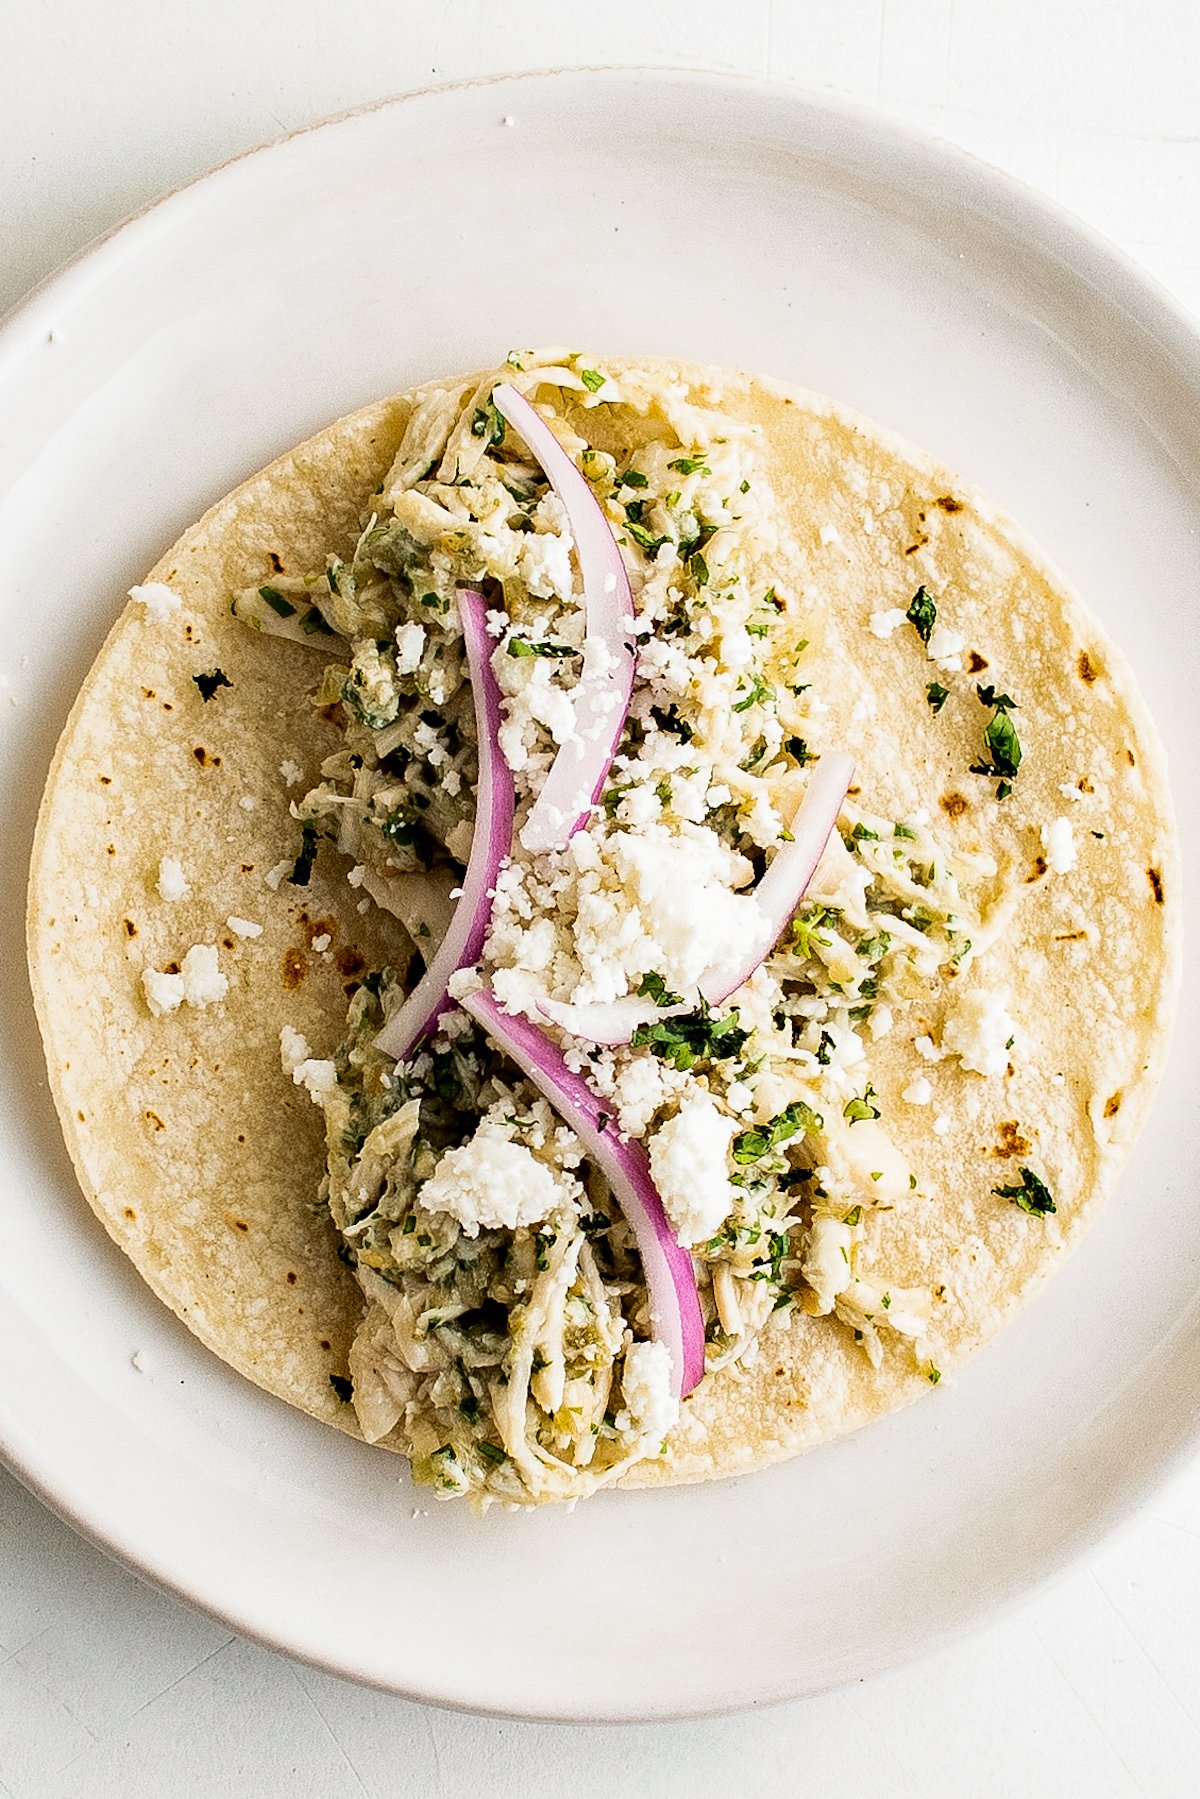 A flour tortilla topped with shredded salsa verde chicken, red onion, and cotija cheese.